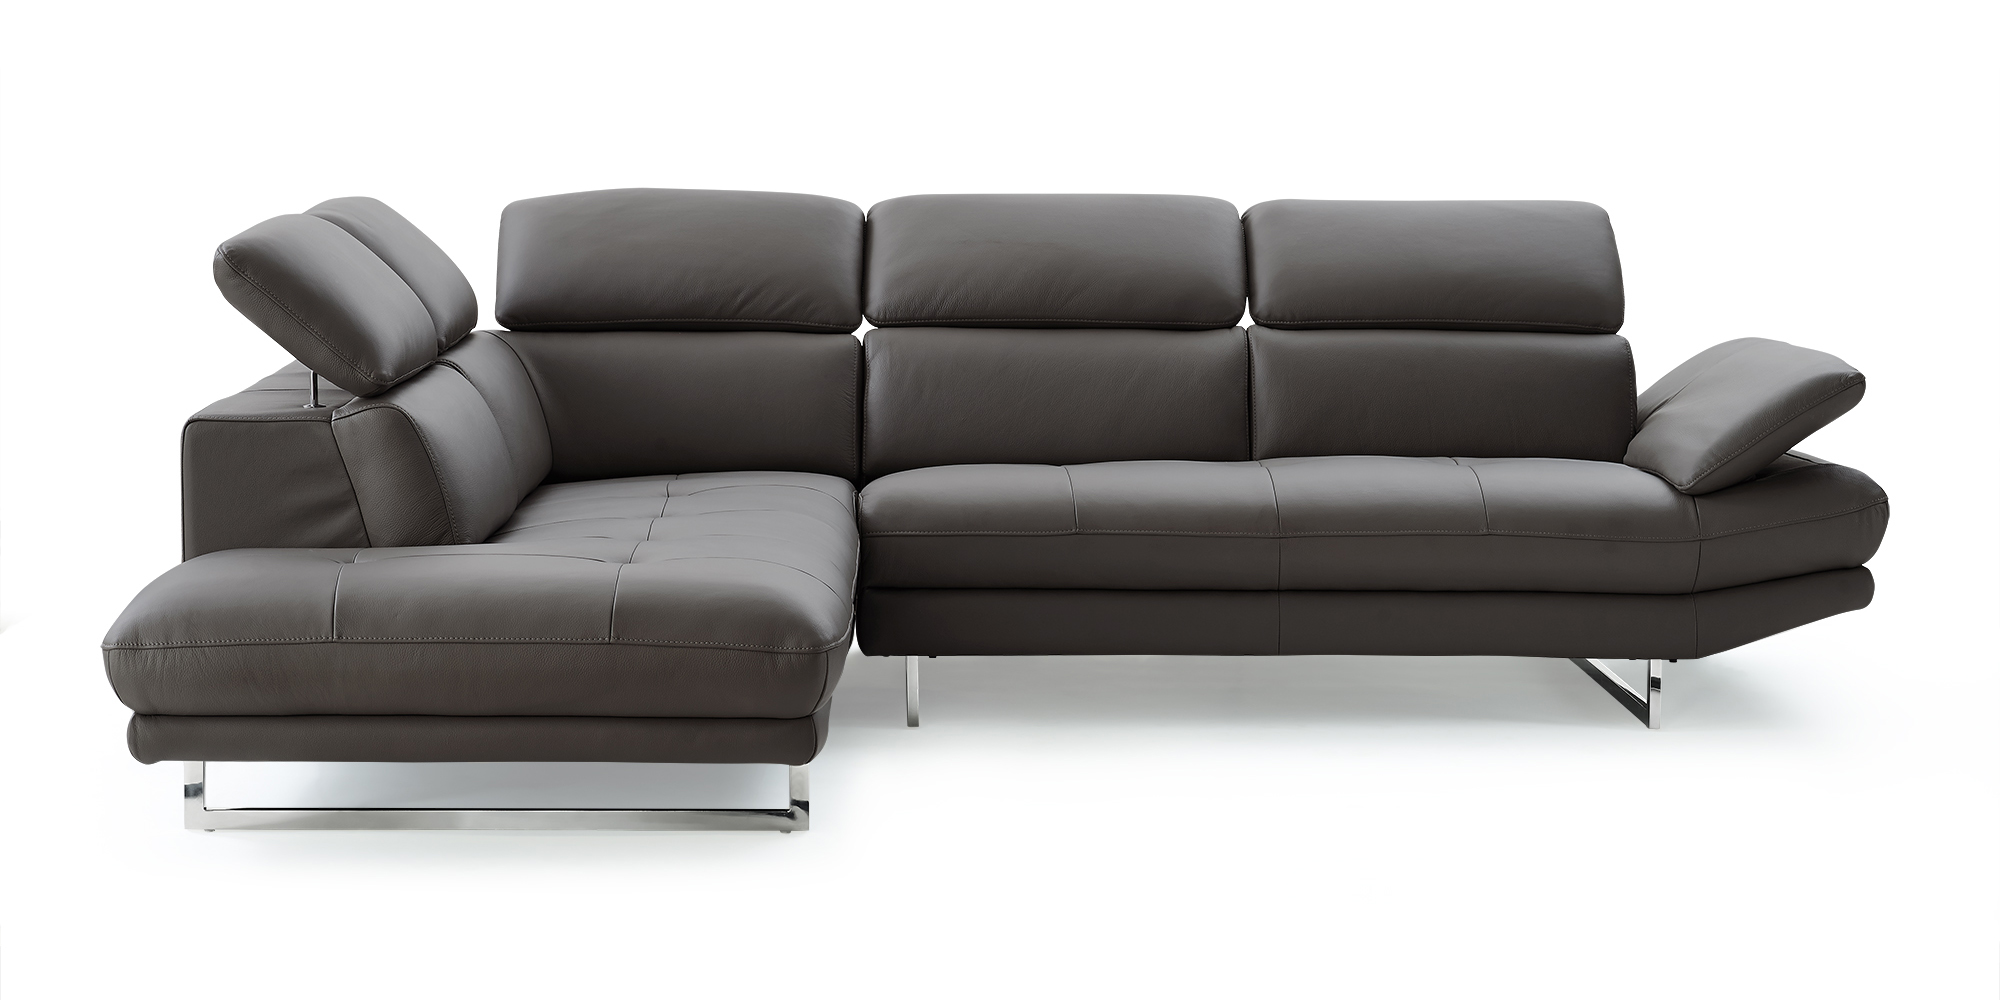 Adjustable Advanced Italian Leather Corner Couch - Click Image to Close